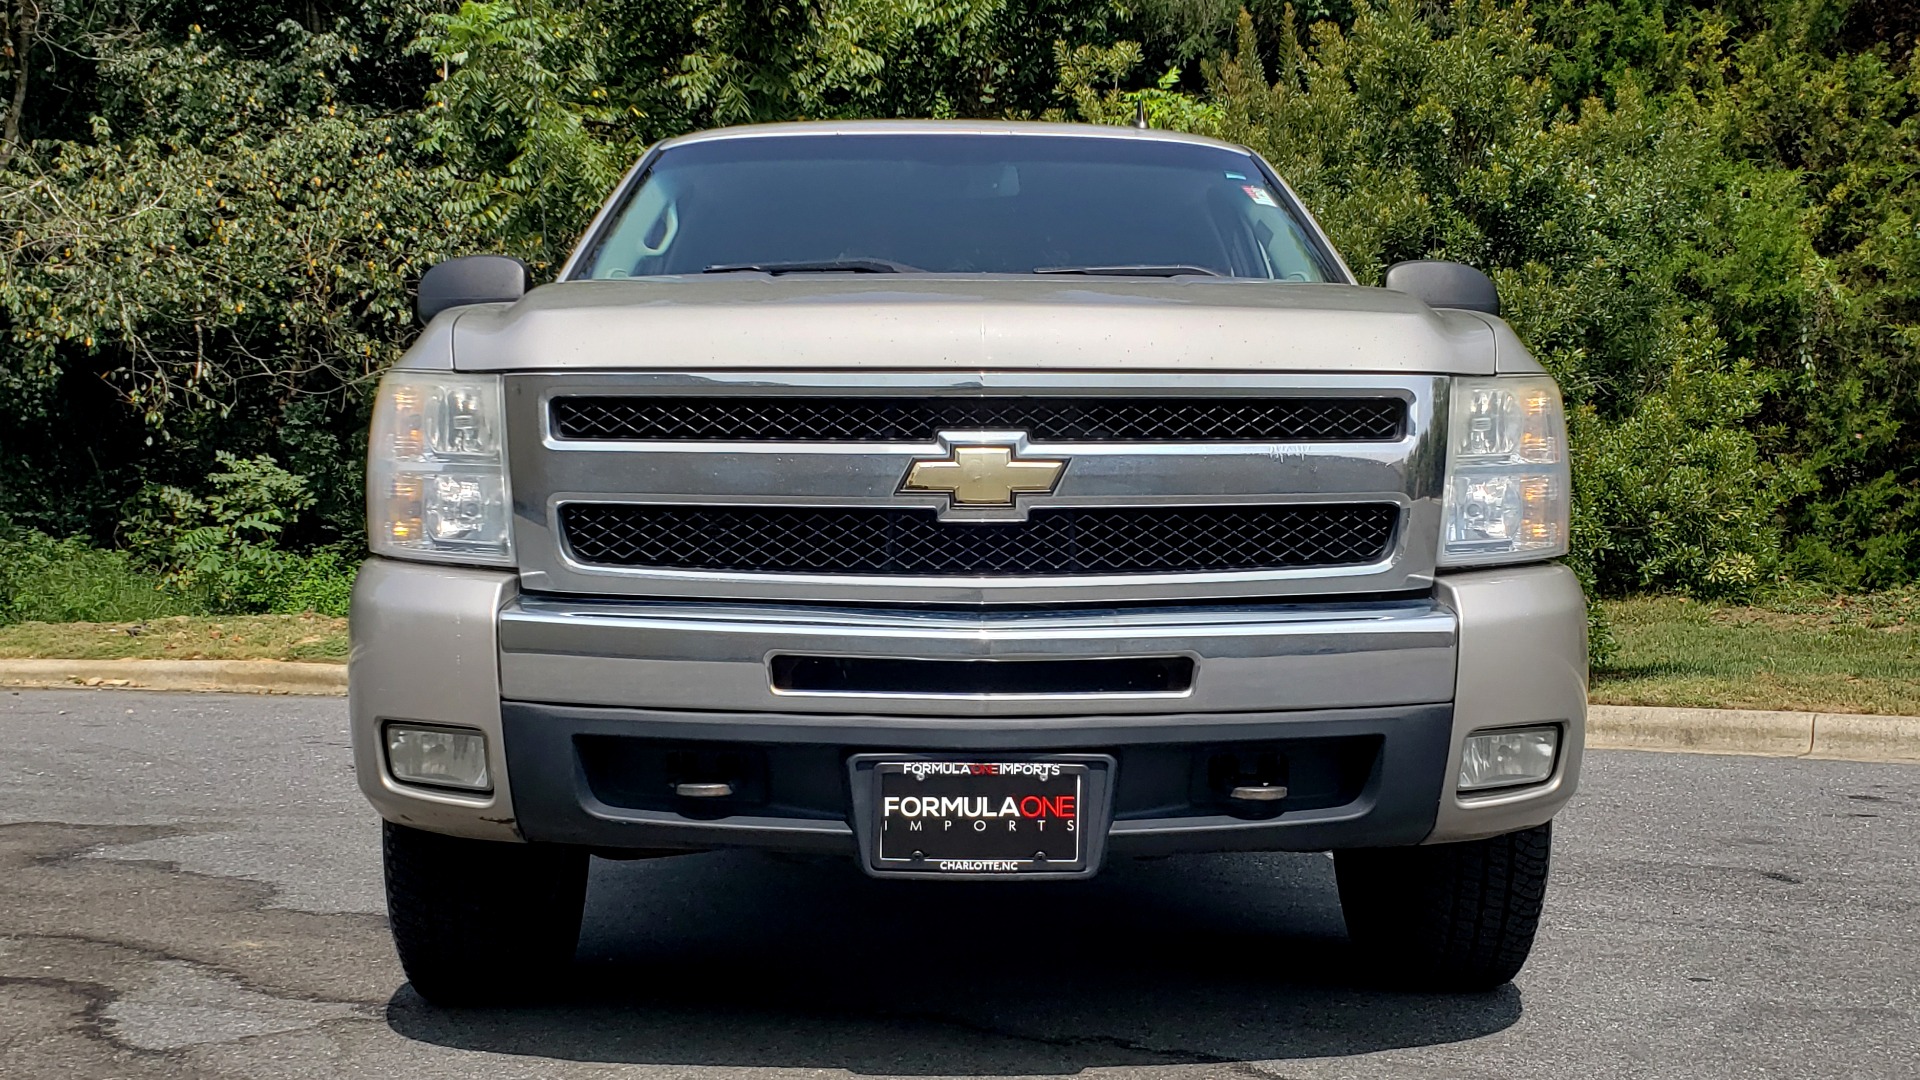 Used 2009 Chevrolet SILVERADO 1500 LT / CREWCAB / 5.3L V8 / 4WD / TRAILER PKG / REARVIEW for sale Sold at Formula Imports in Charlotte NC 28227 15